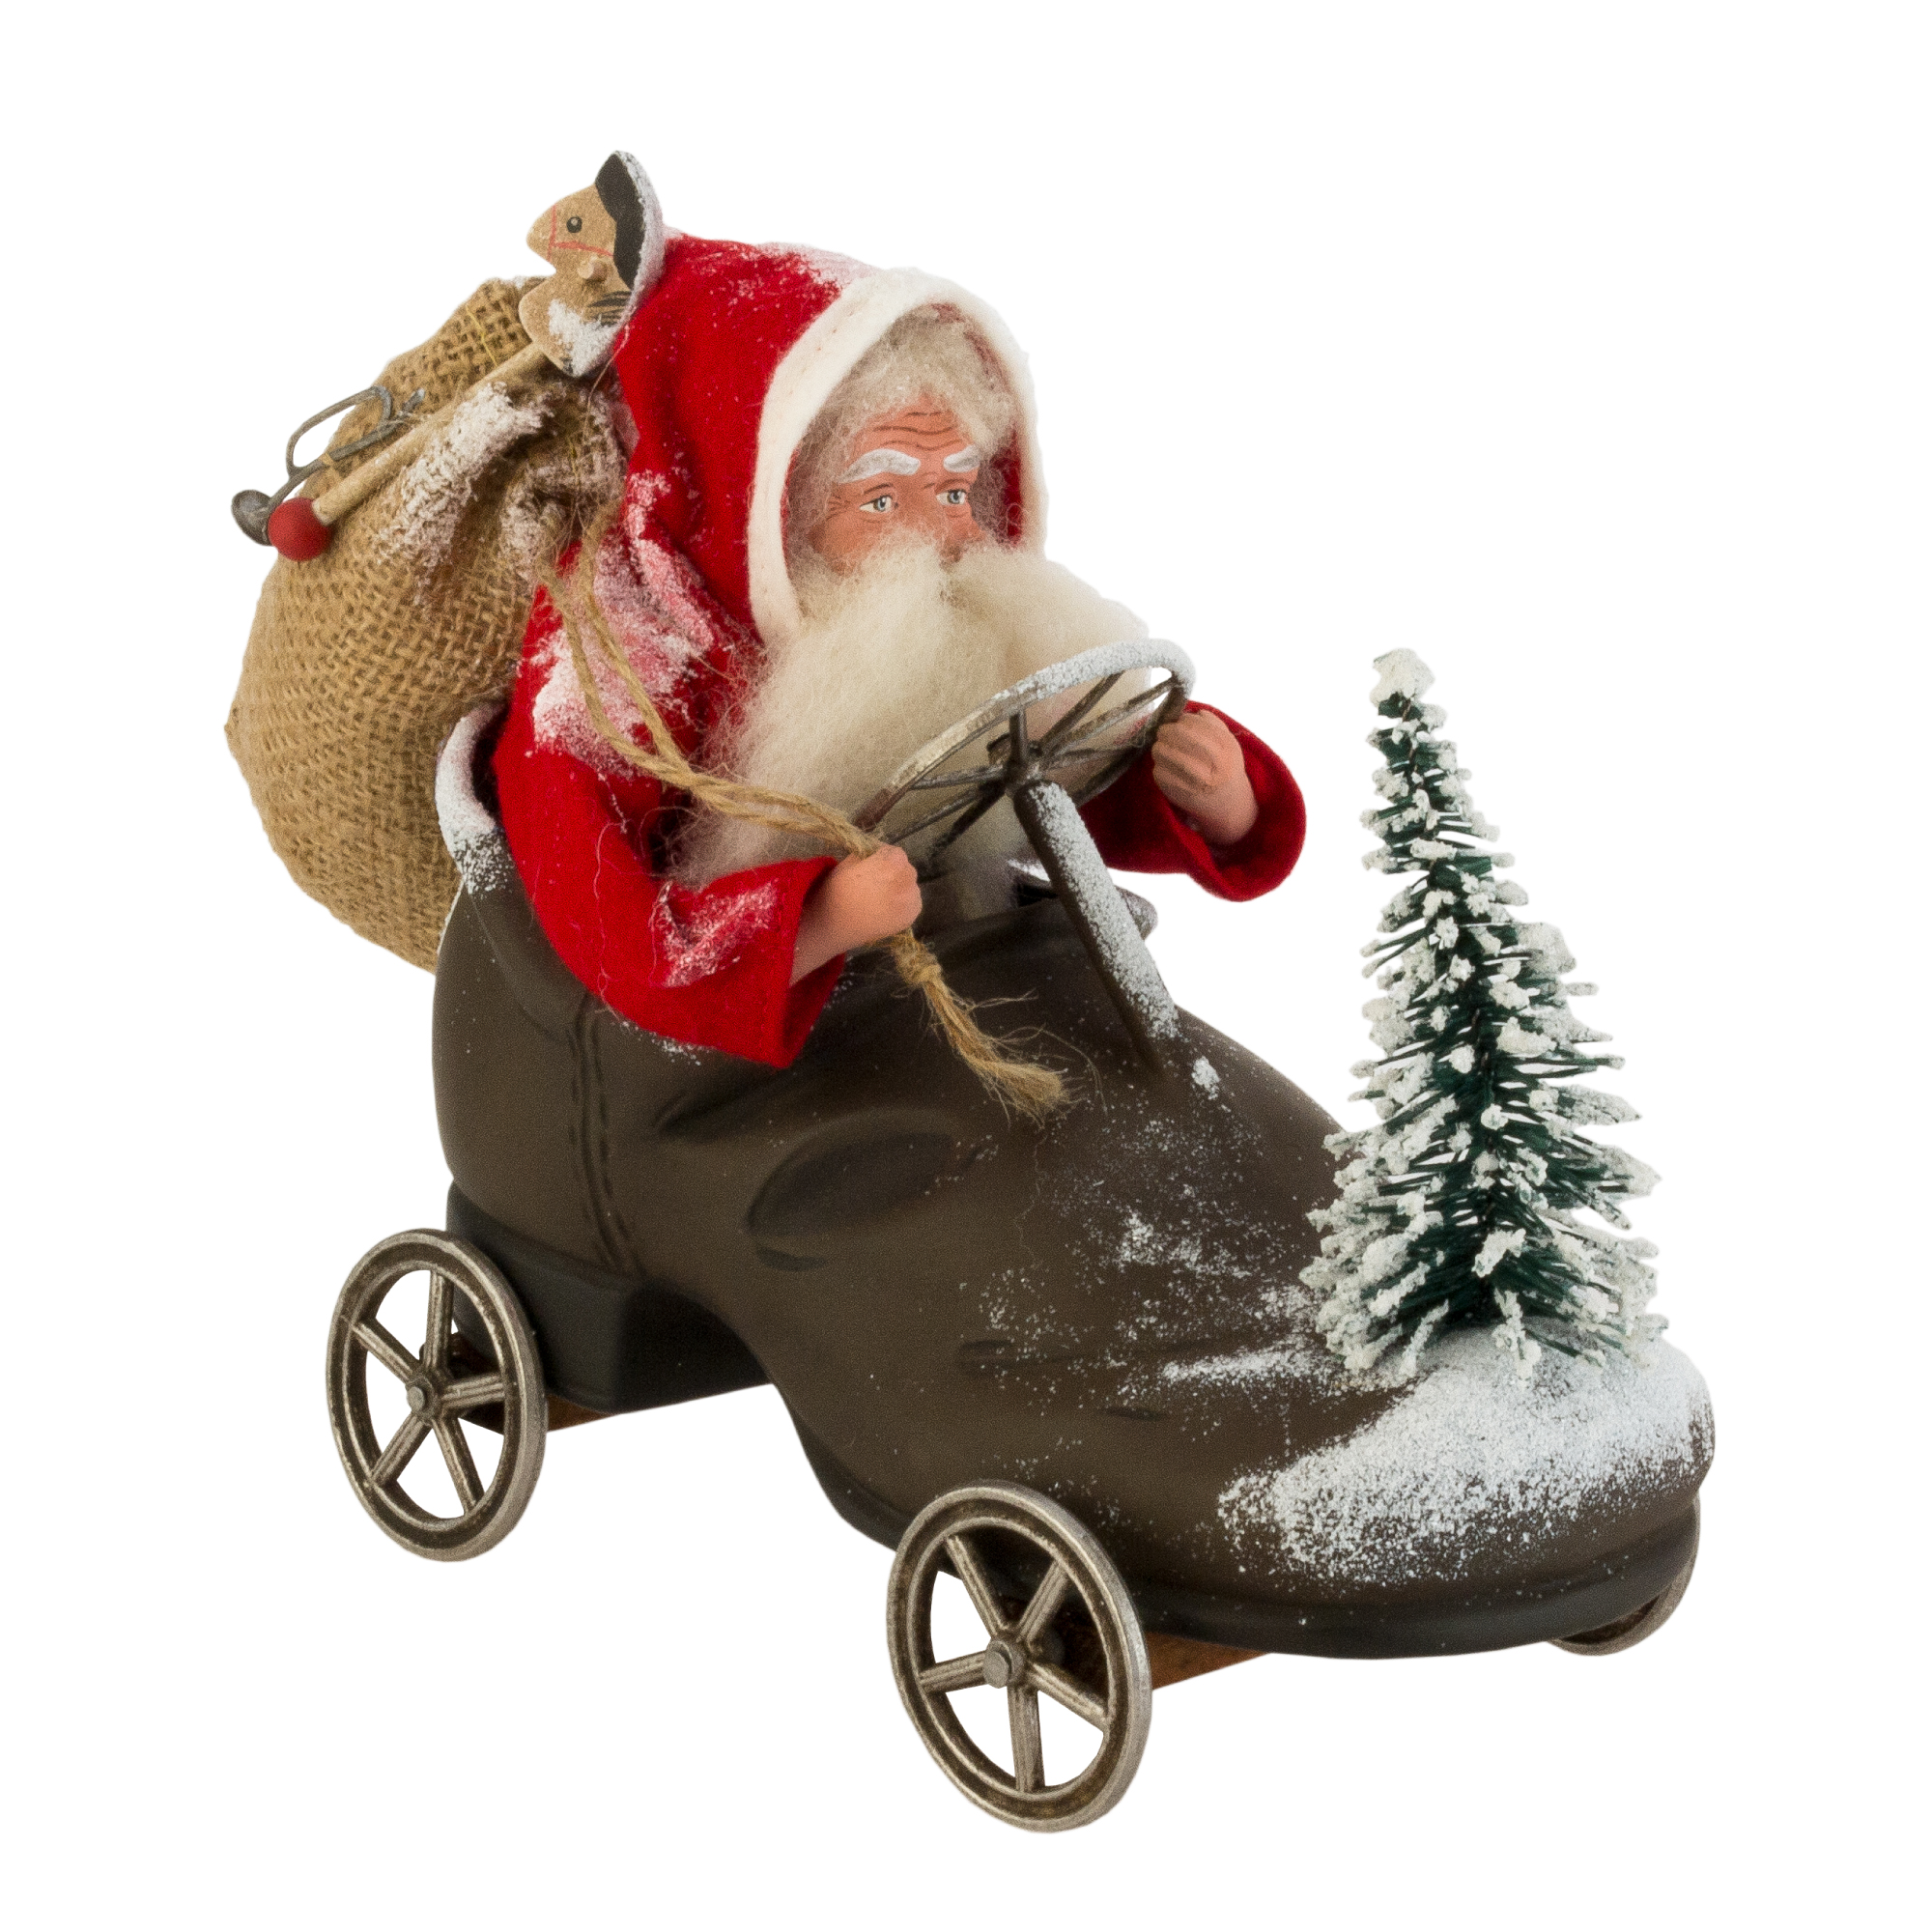 Dressed Santa Claus sitting in a shoe with wheels, feather tree and sack with toys,  L = 9 inch , H = 6.7 inch